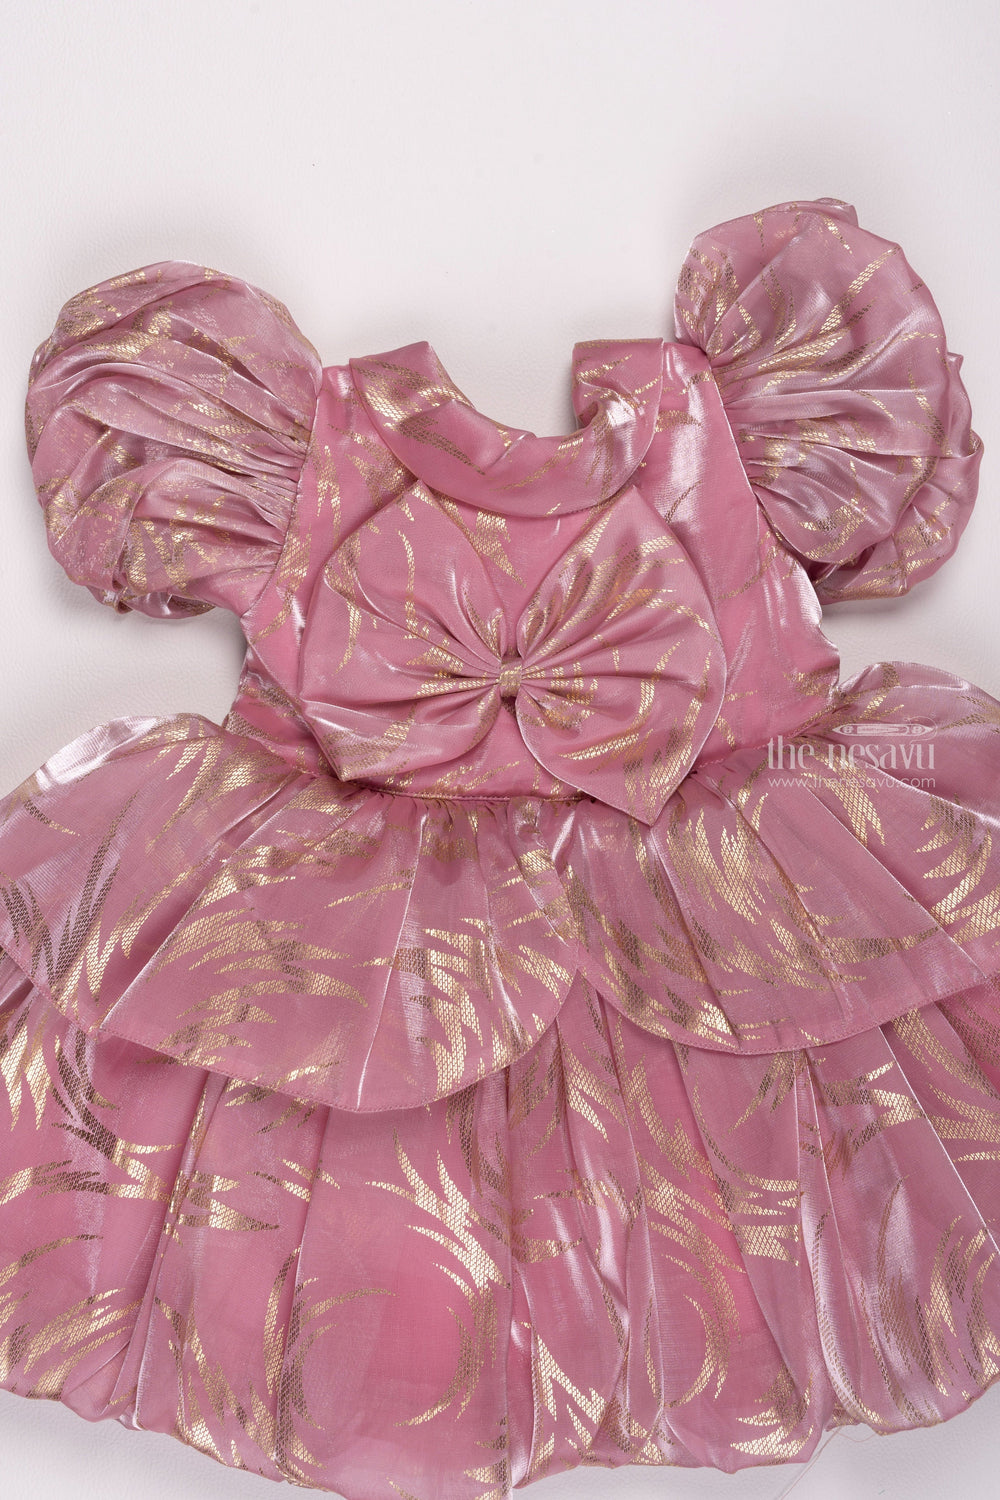 The Nesavu Girls Fancy Party Frock Rose Radiance: Girls Organza Party Frock with Lustrous Foil Print & Bow Detail Nesavu Mermaid Birthday Outfits: Trendy & Stylish Baby Girl Frocks | The Nesavu